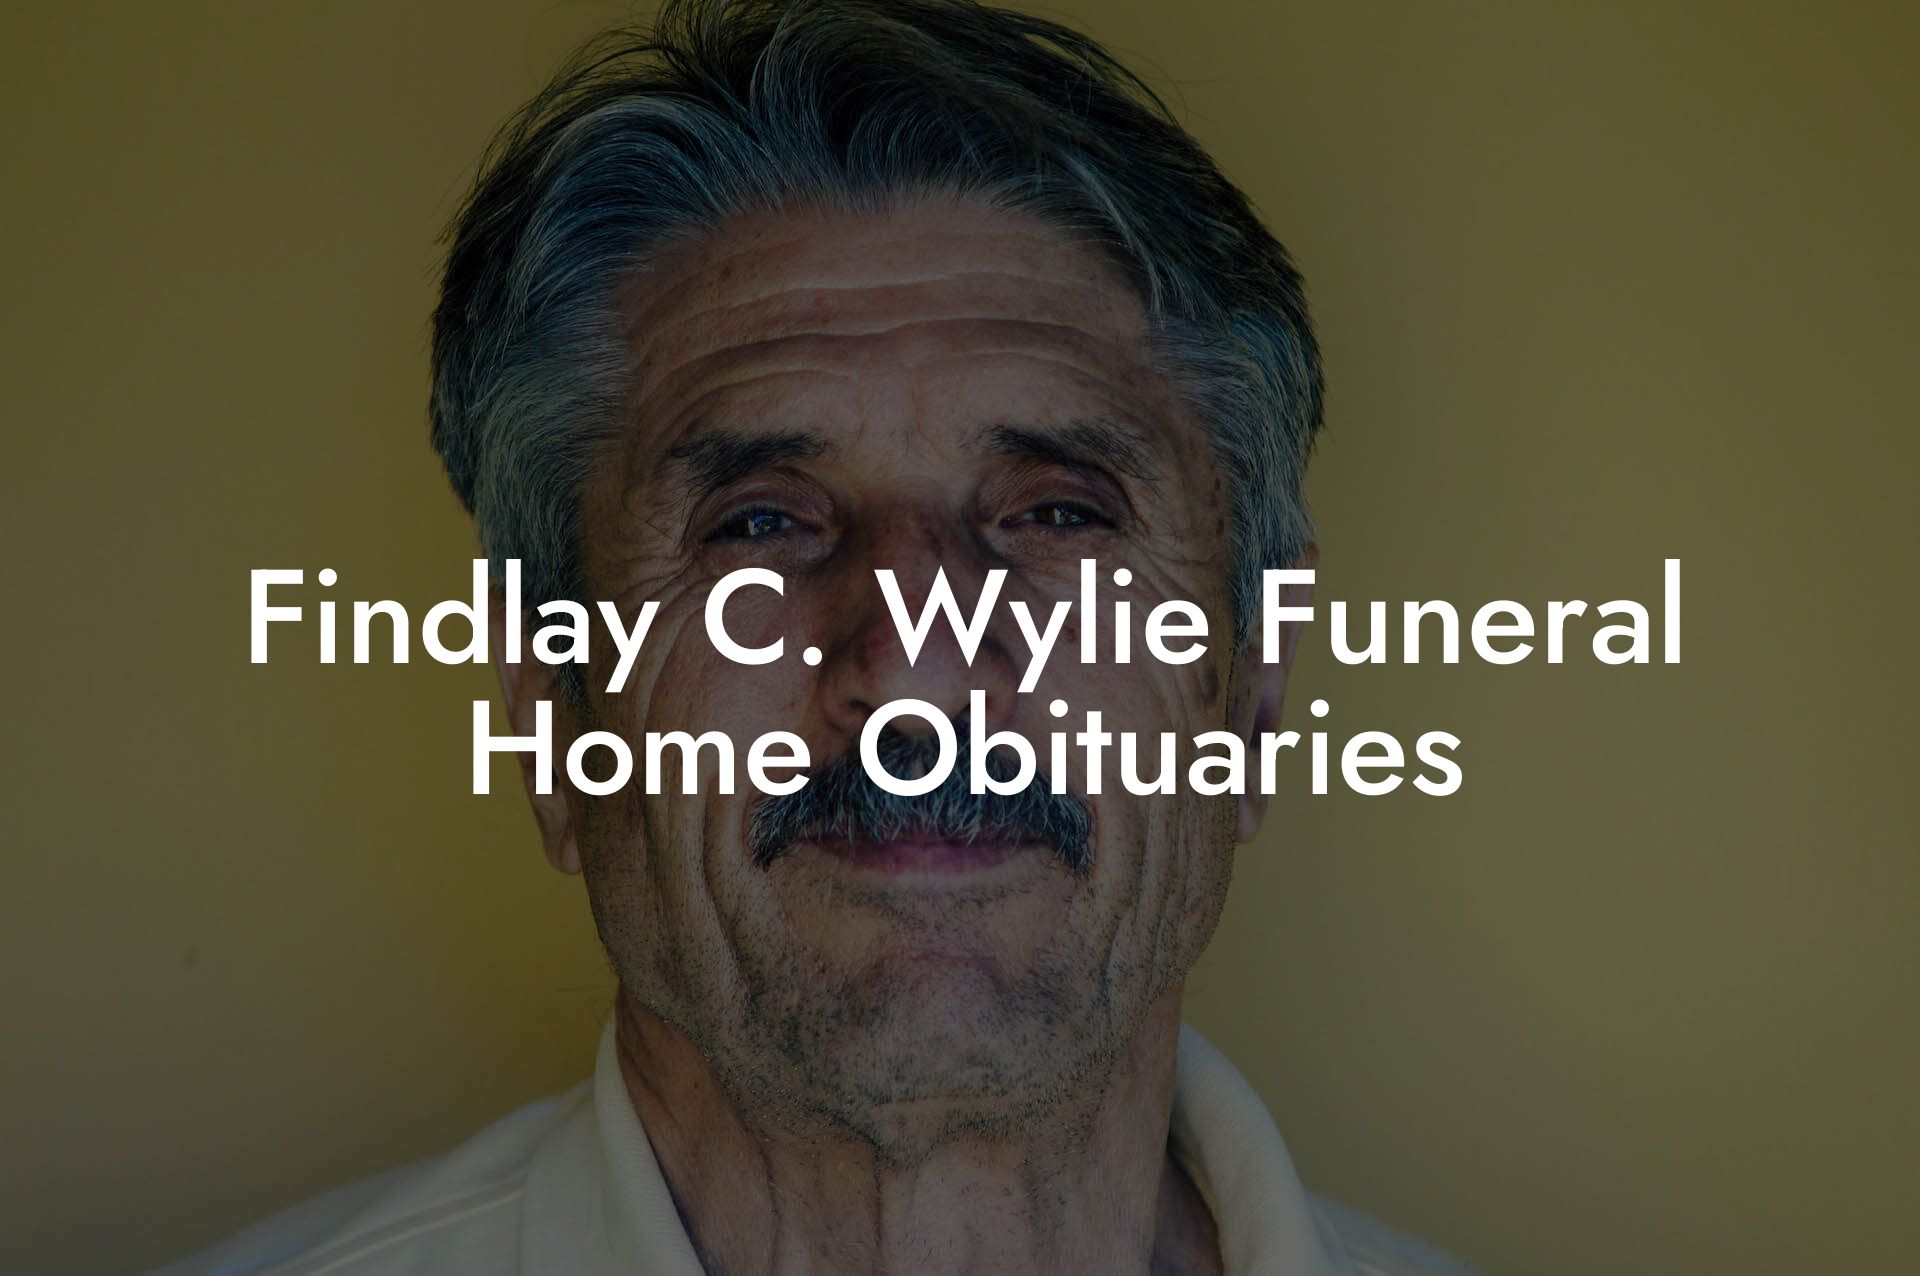 Findlay C. Wylie Funeral Home Obituaries